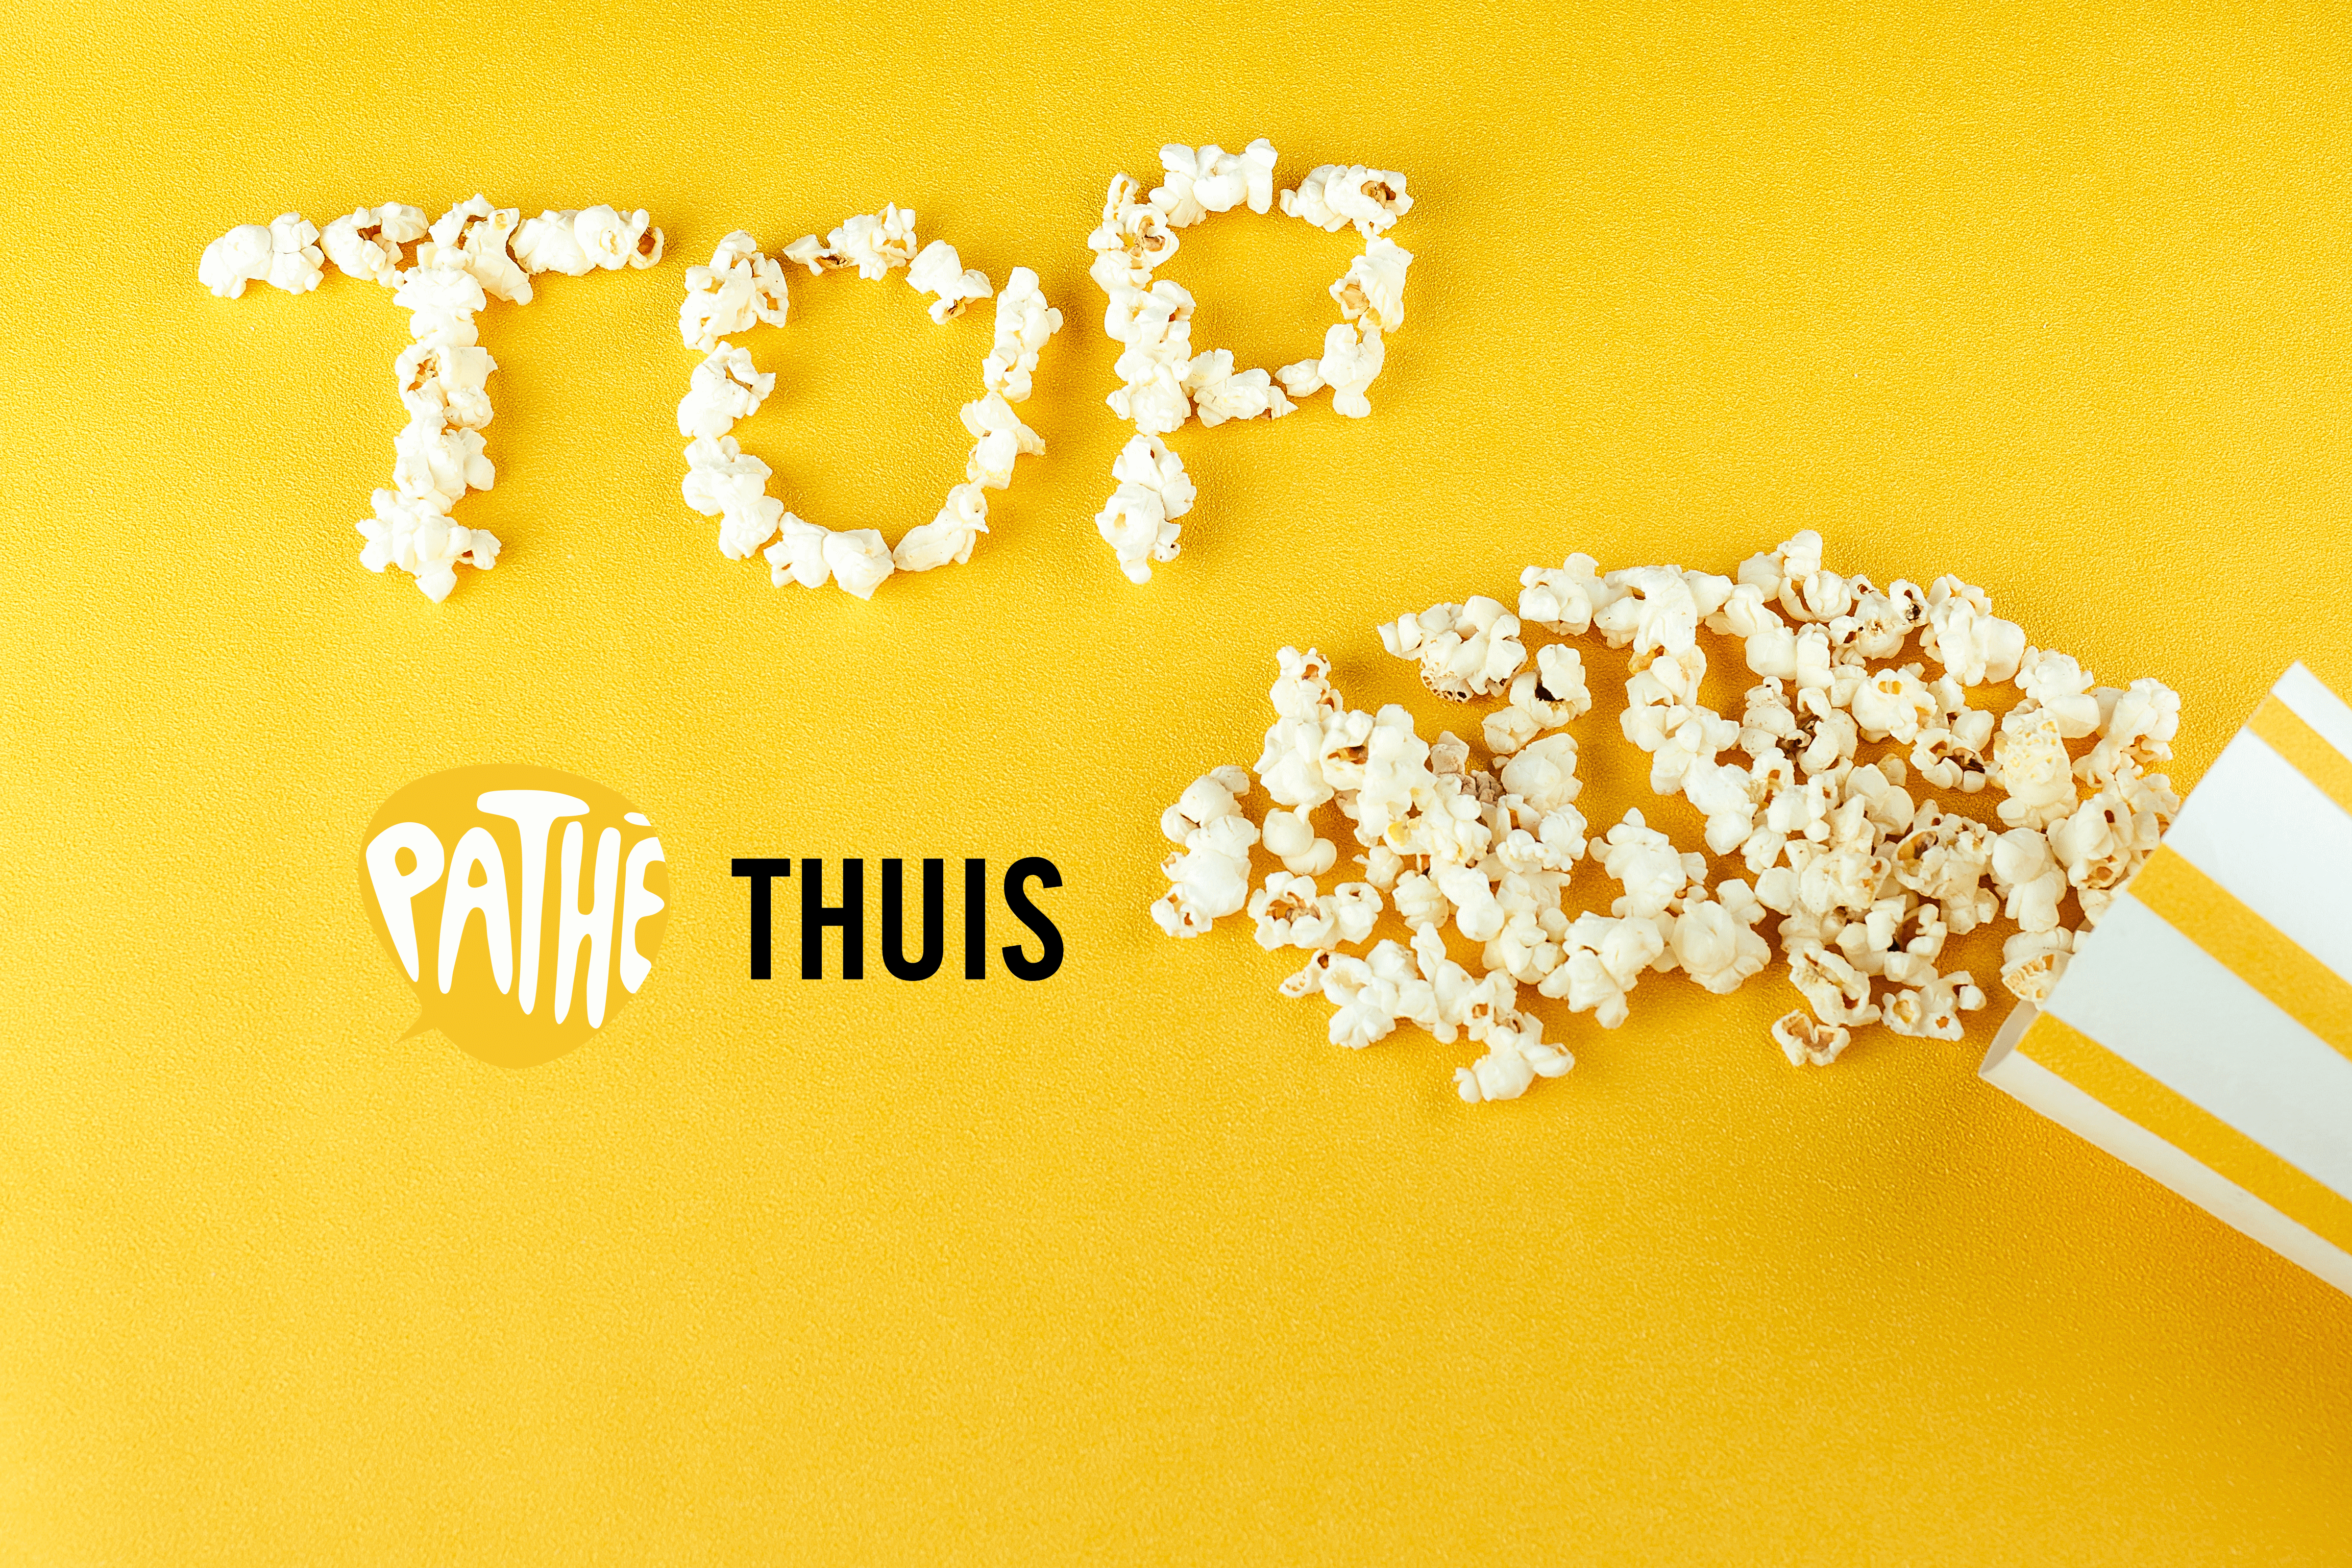 top 10 pathe thuis